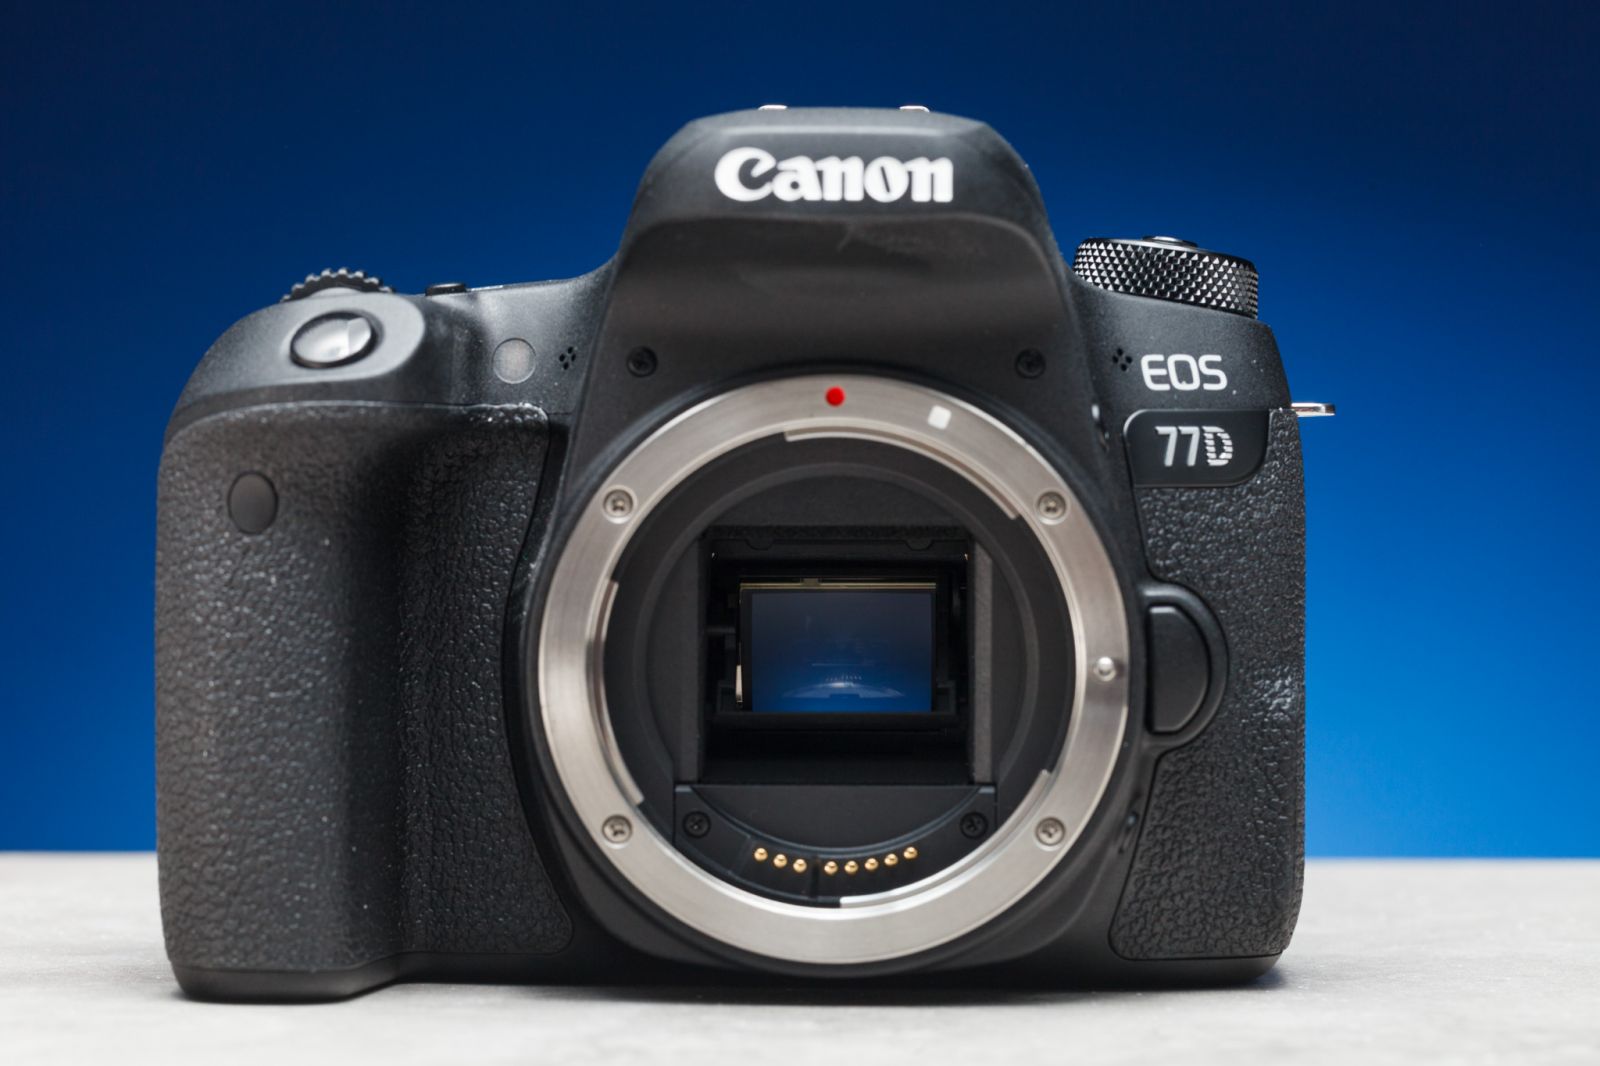 77D Review | Solid Beginner's Camera Offering Room To Grow & Some New Canon Tech